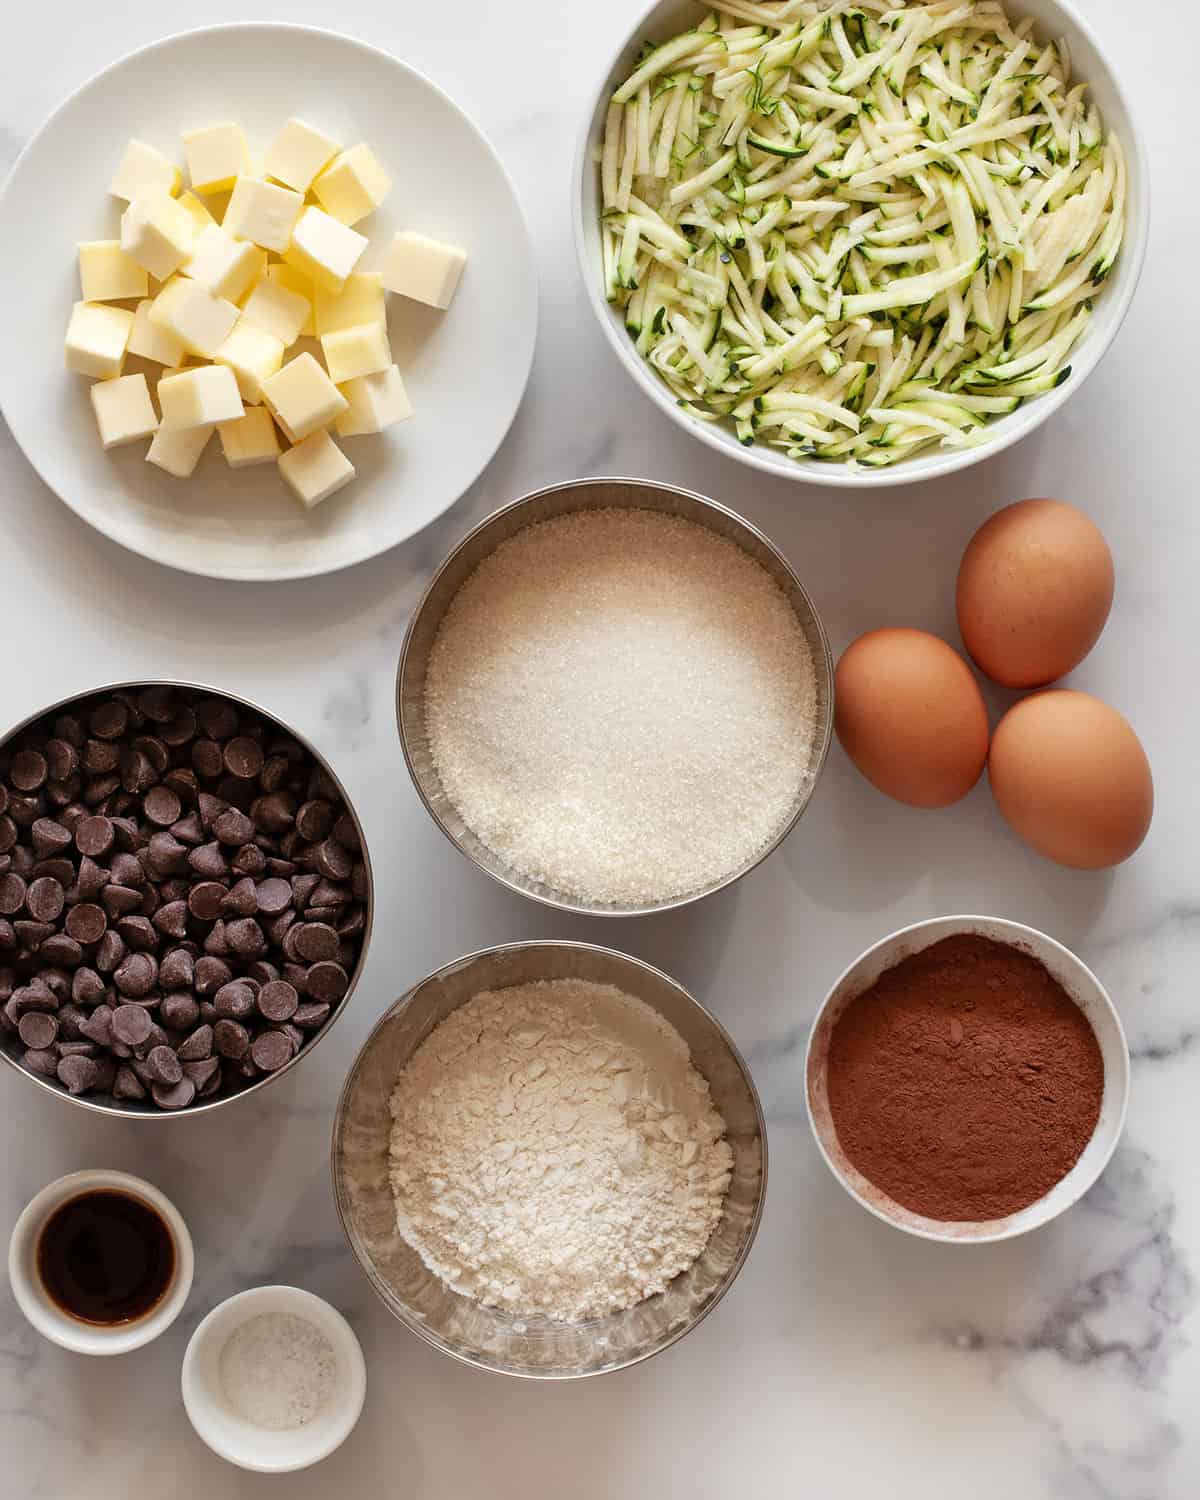 Ingredients including chocolate, shredded zucchini, butter, sugar, eggs, cocoa powder and salt.